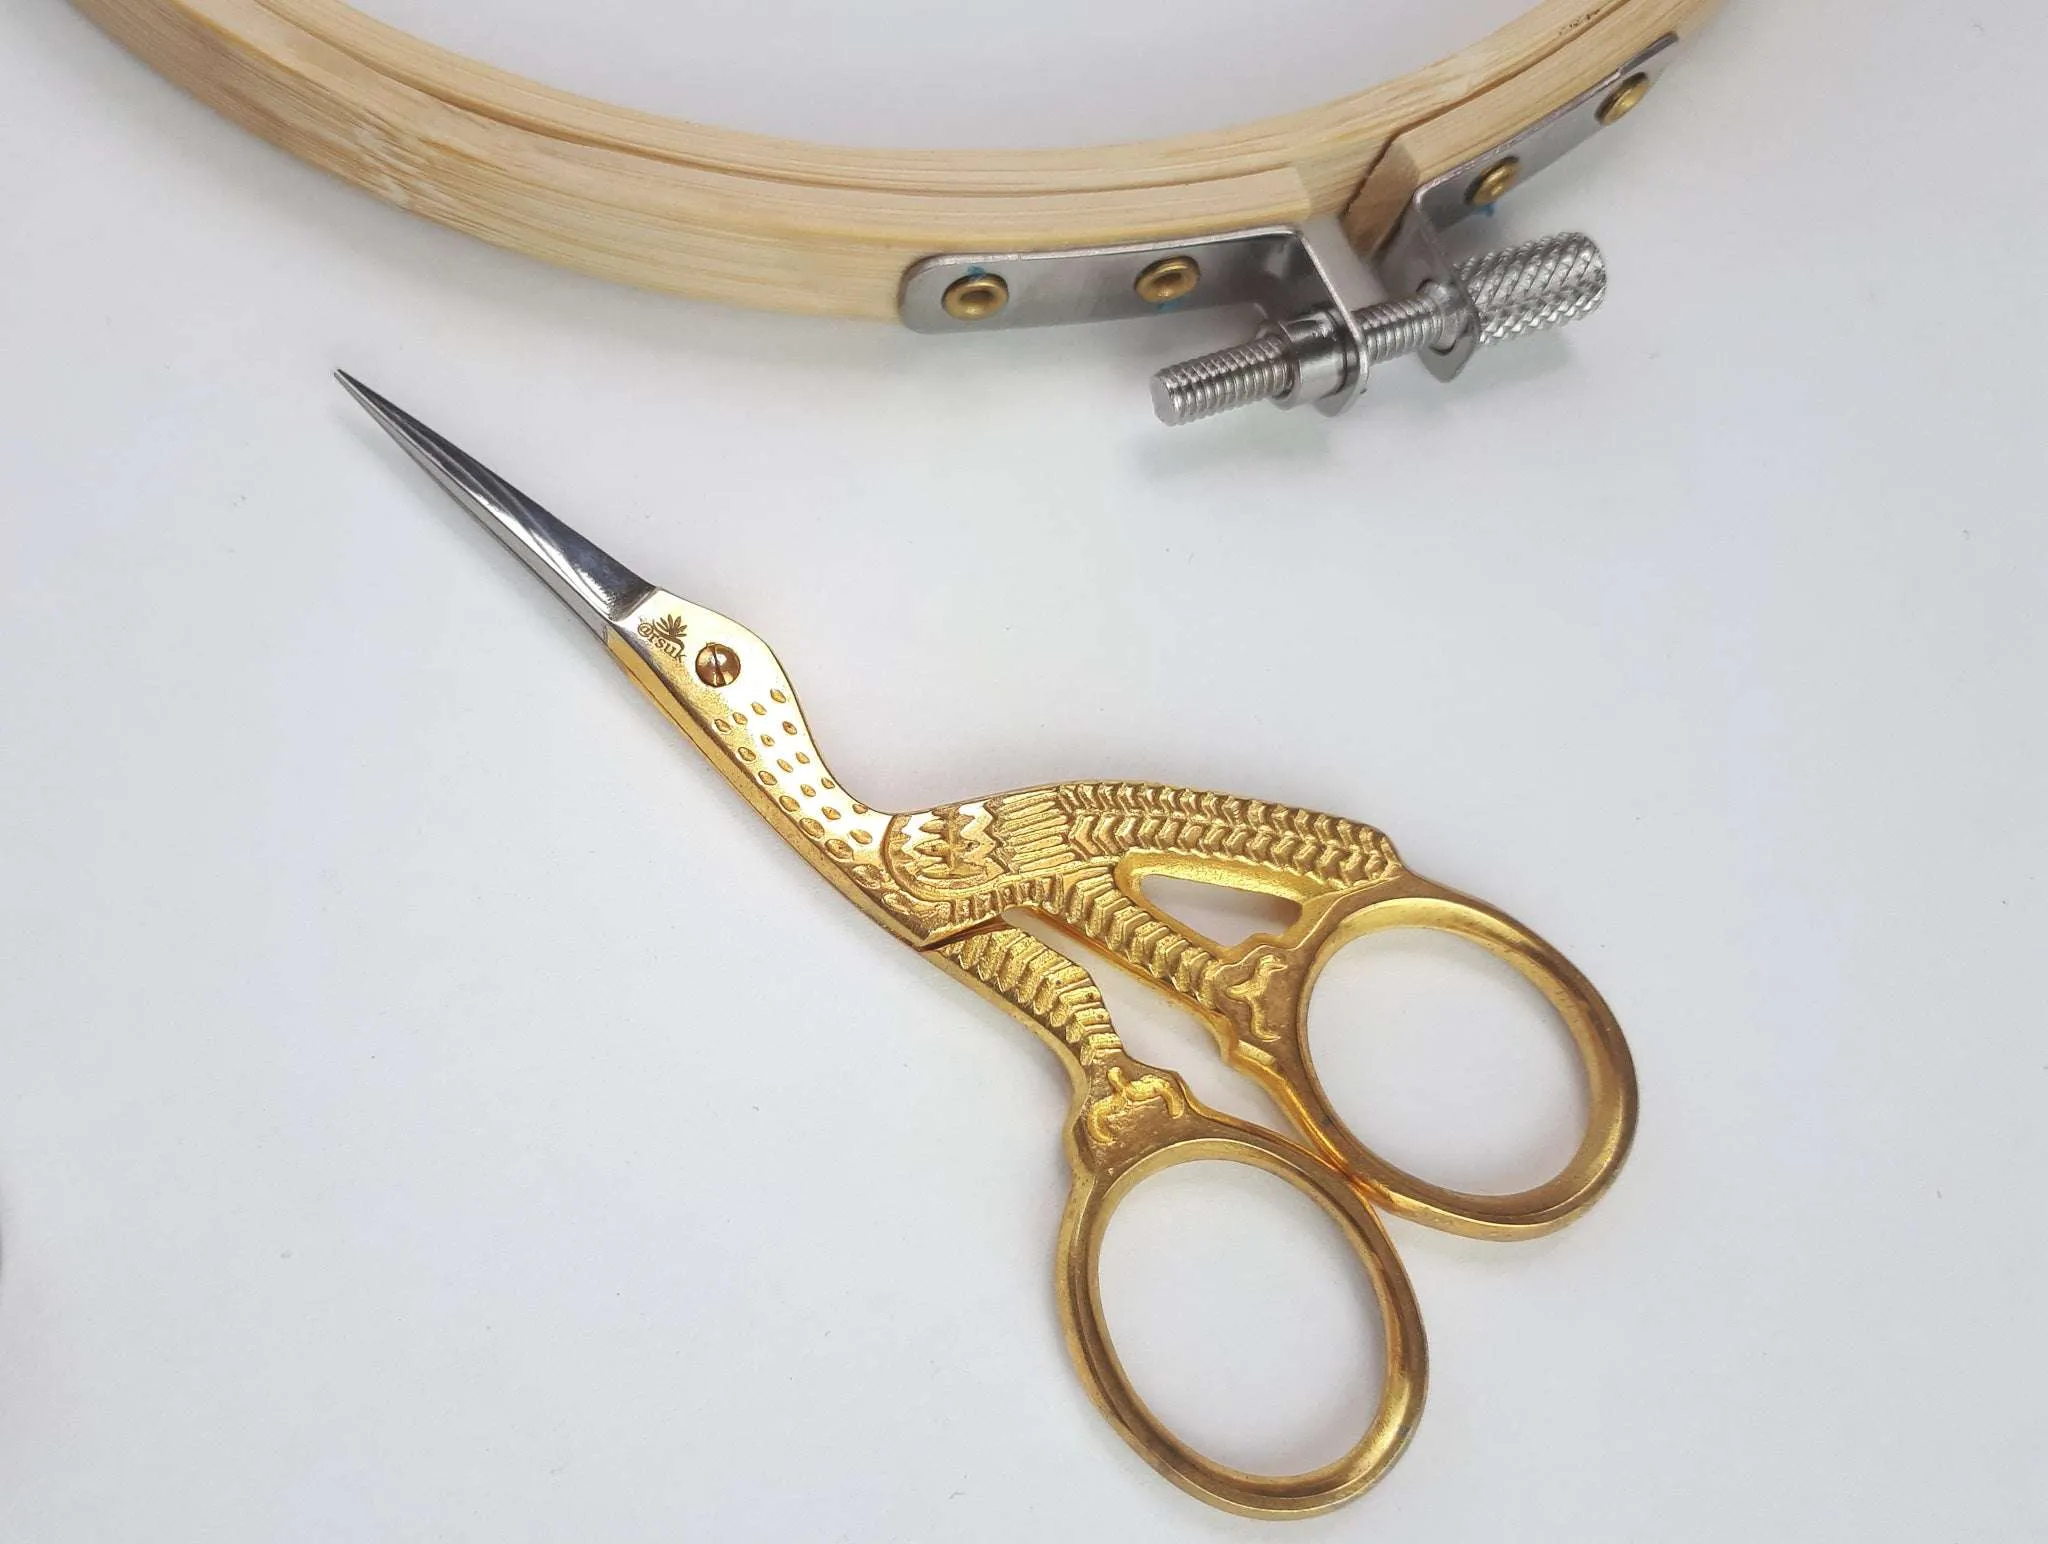 Small gold embroidery scissors shaped like a stork